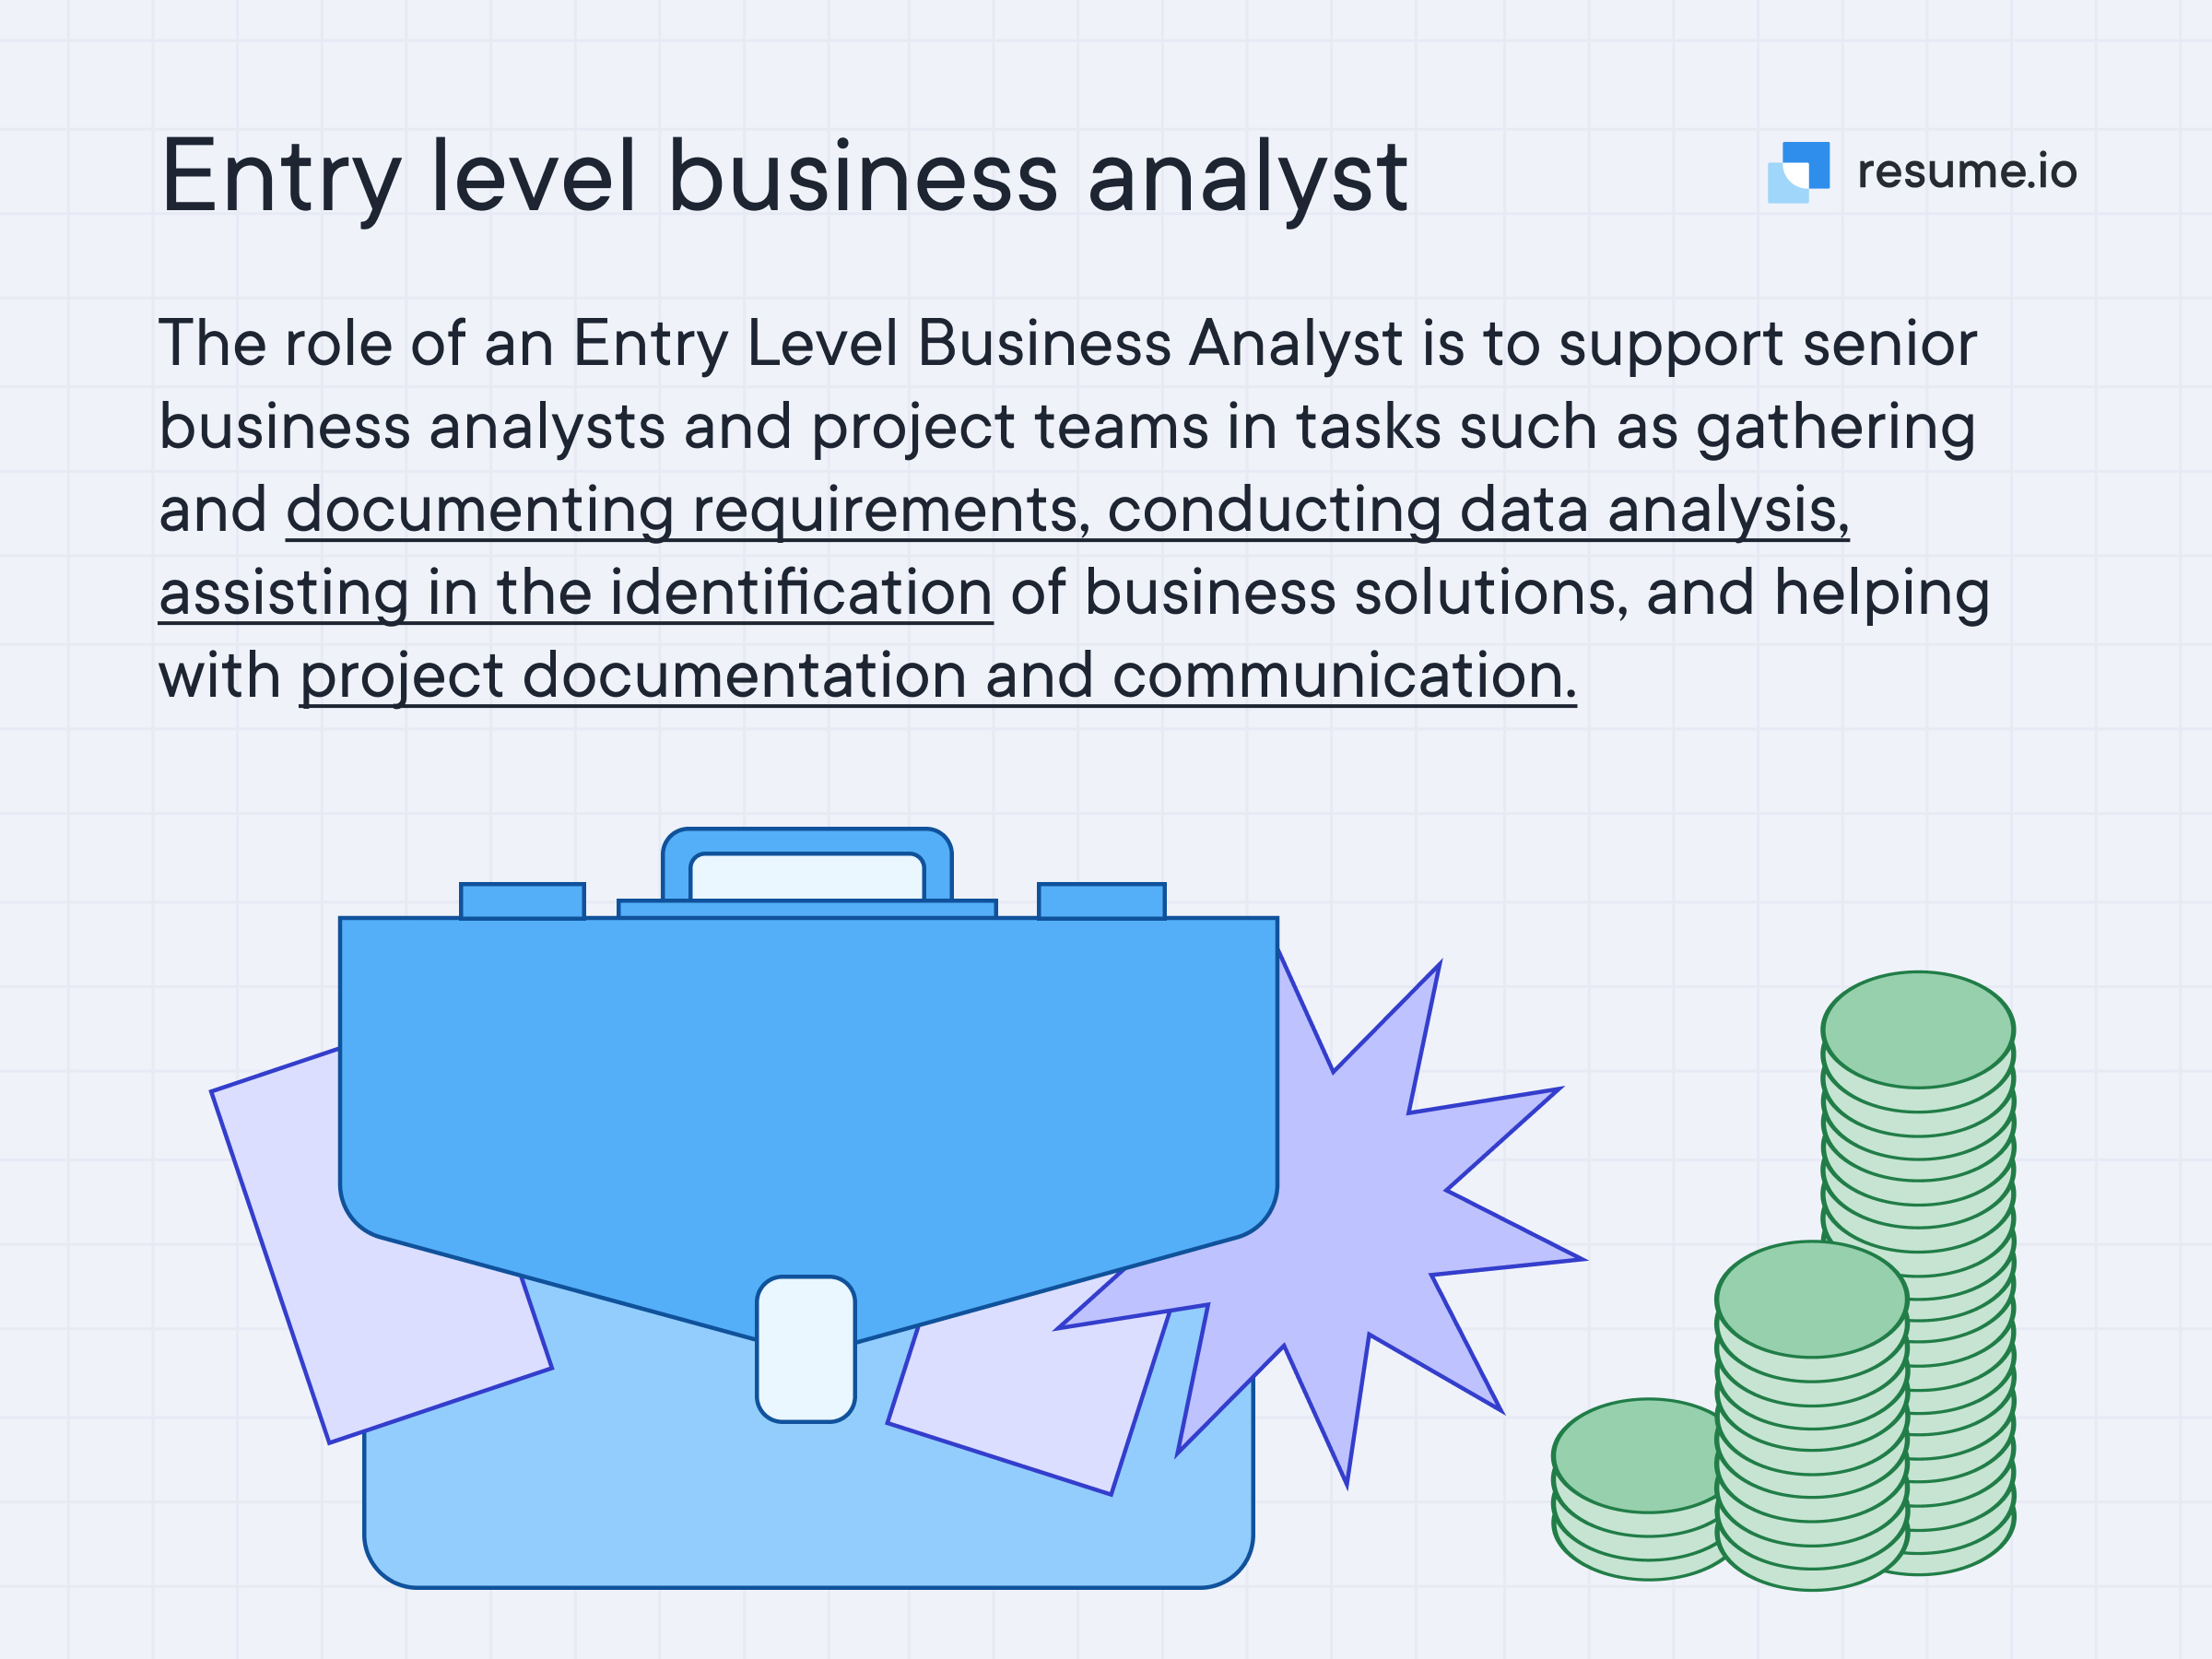 The role of an Entry Level Business Analyst is to support senior business analysts and project teams in tasks